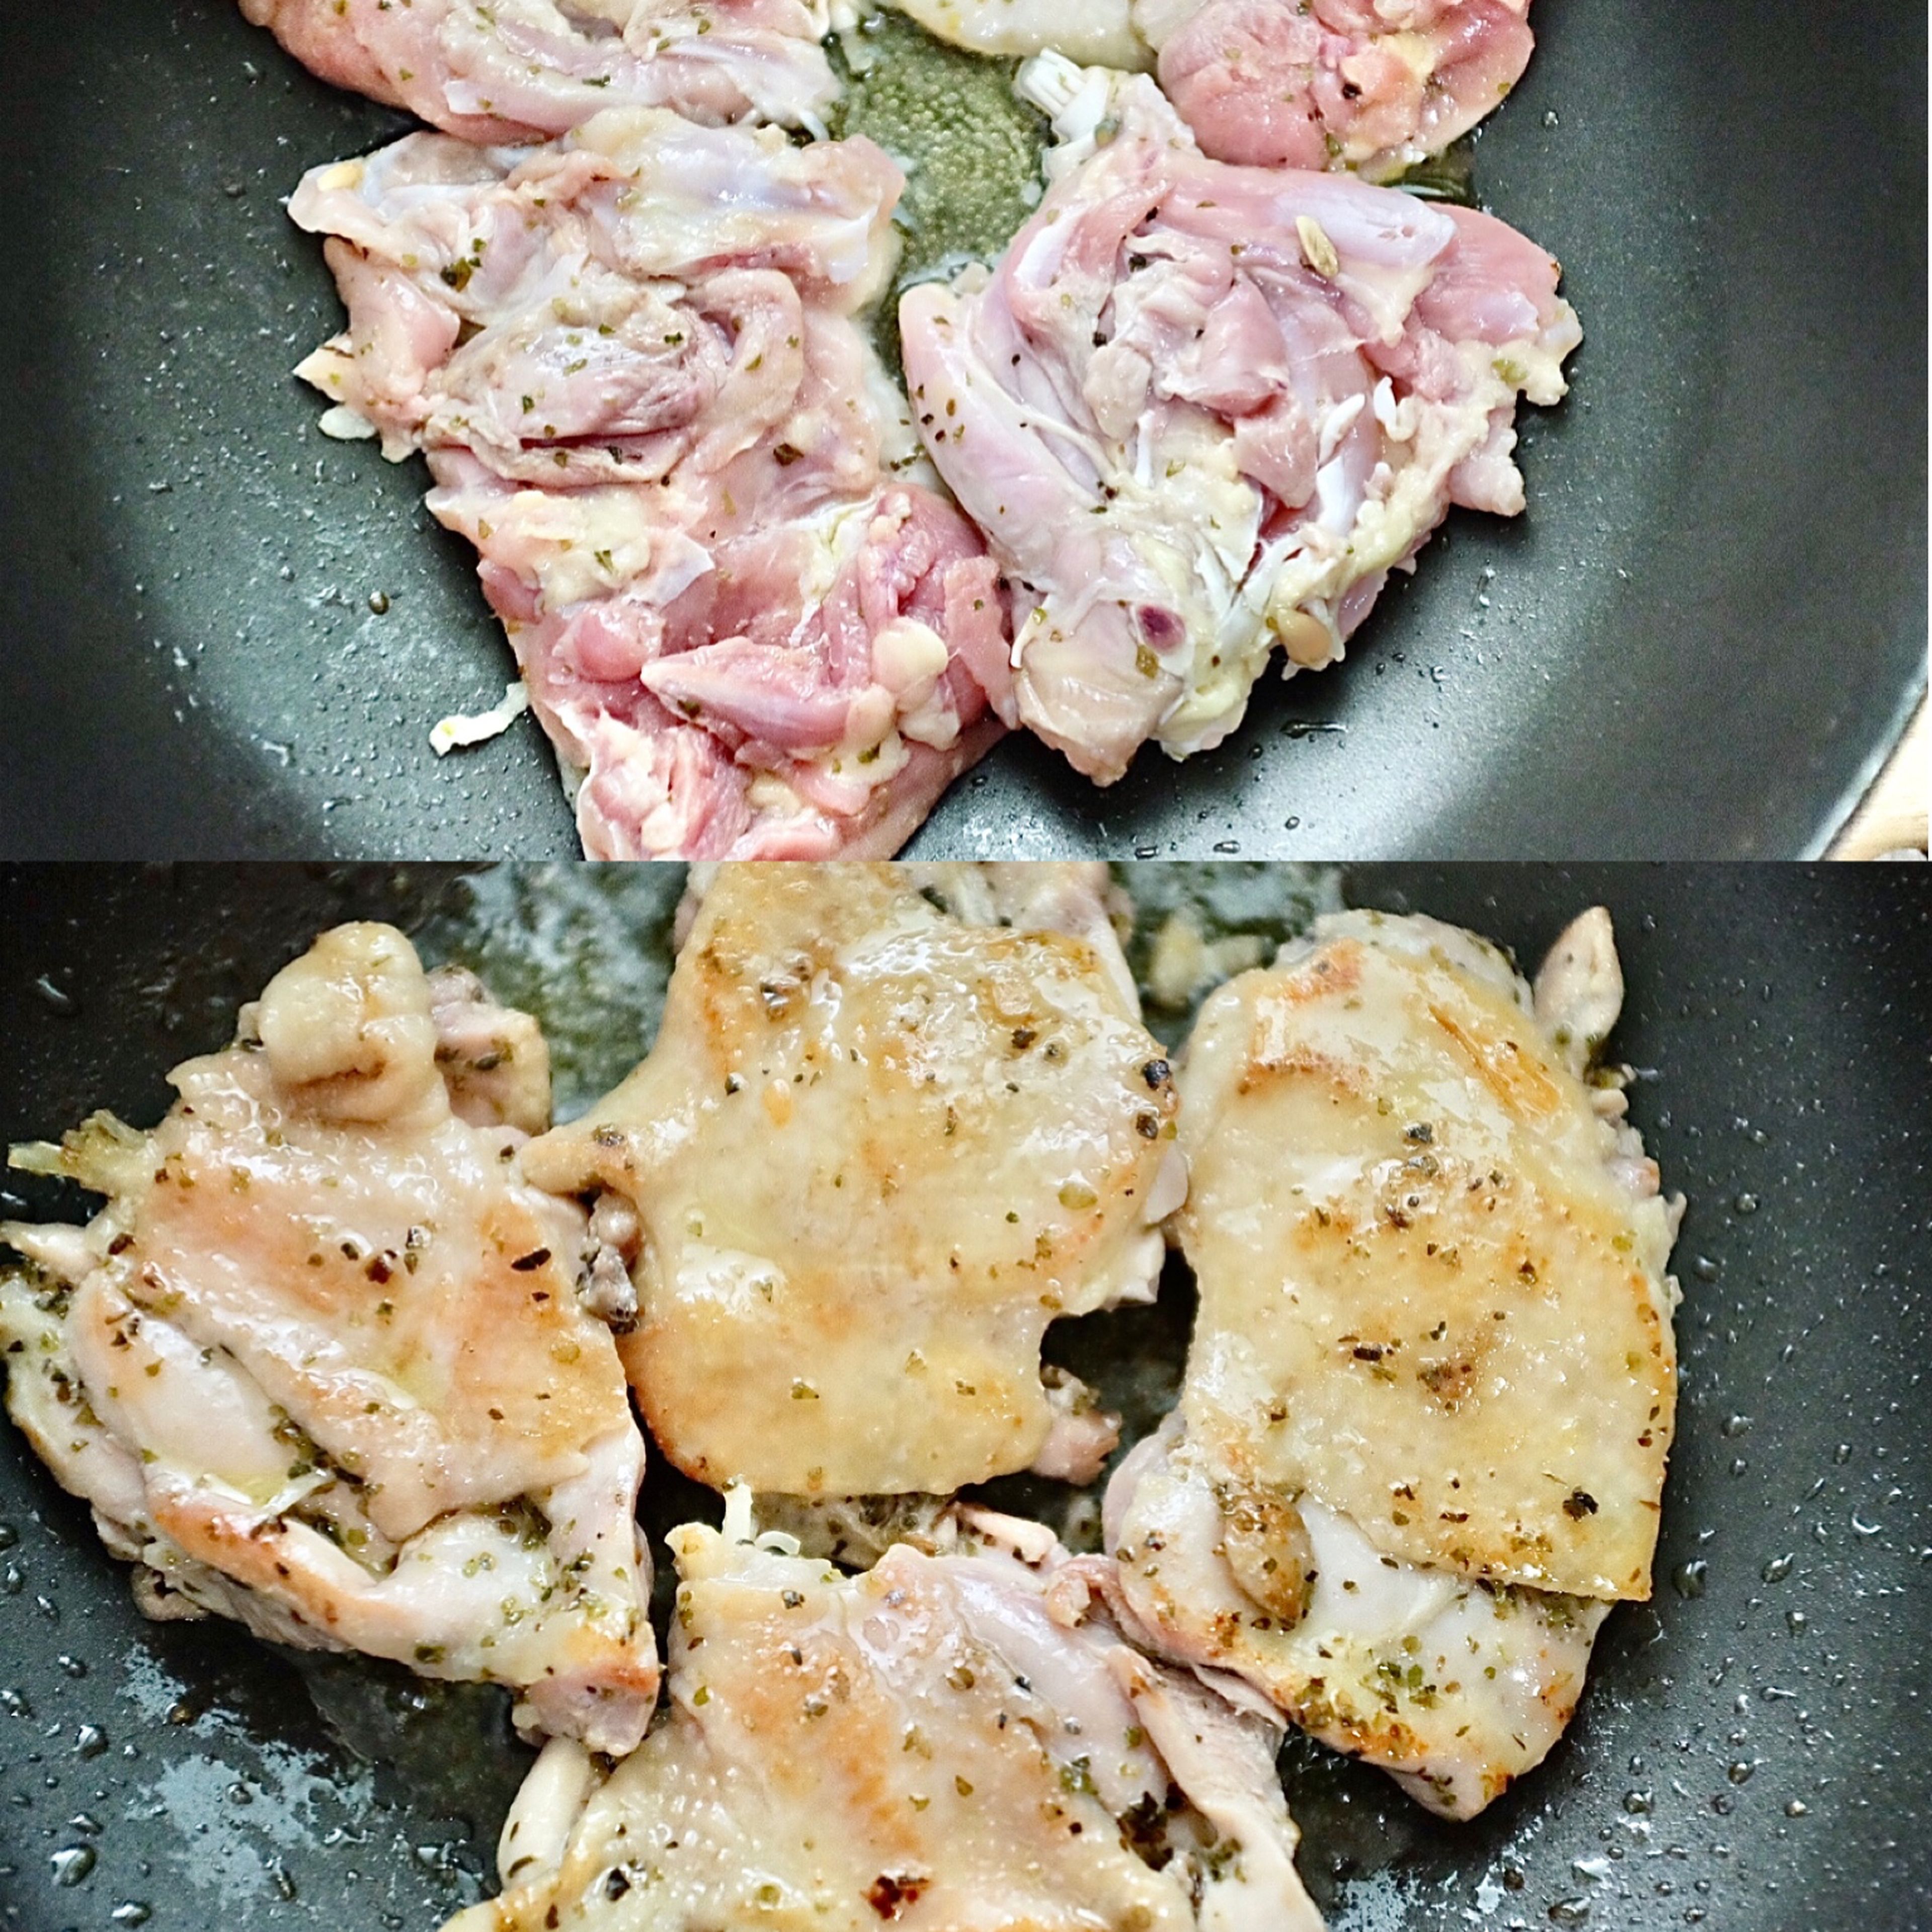 Put the olive oil into a pan with medium heat , add the chicken thighs , skin side down , and cook until browned on 2 sides . Transfer to a plate .